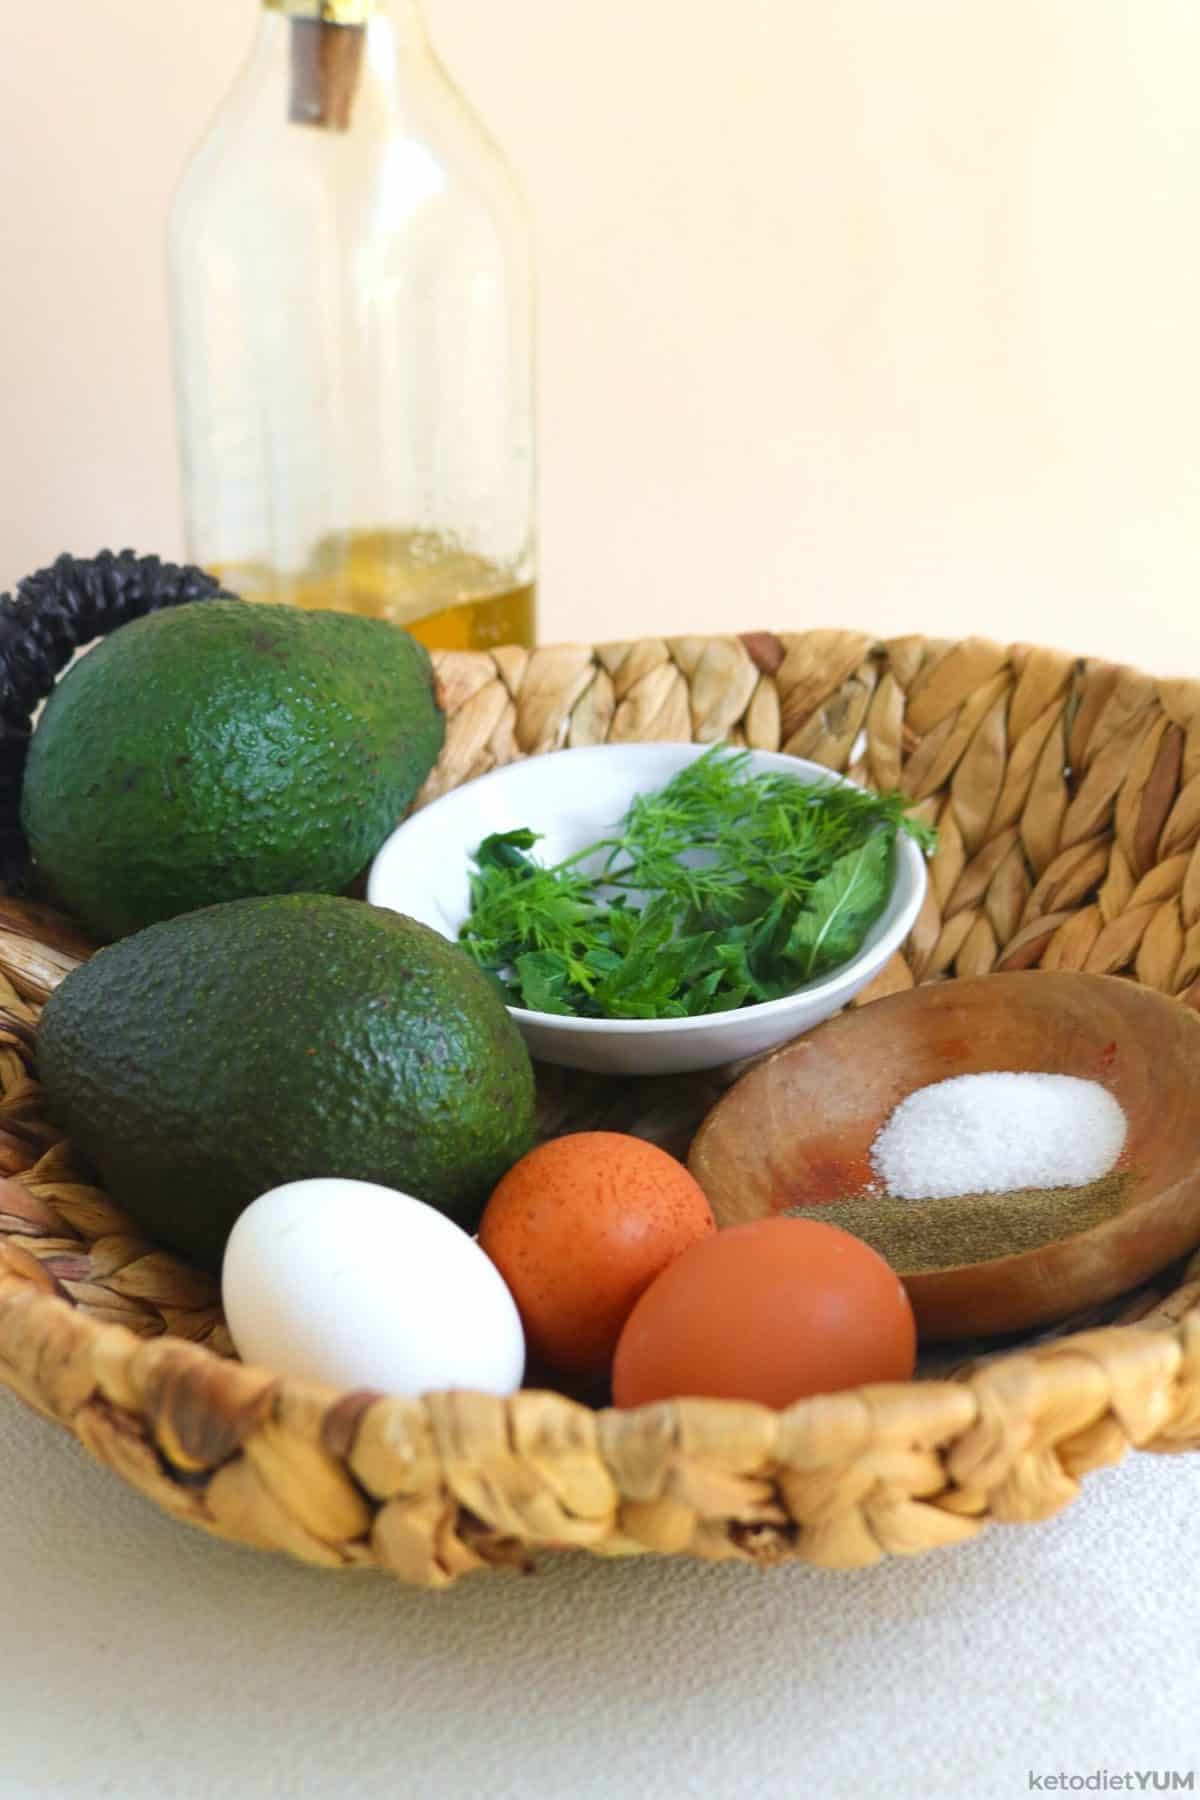 Ingredients used to make baked avocado eggs